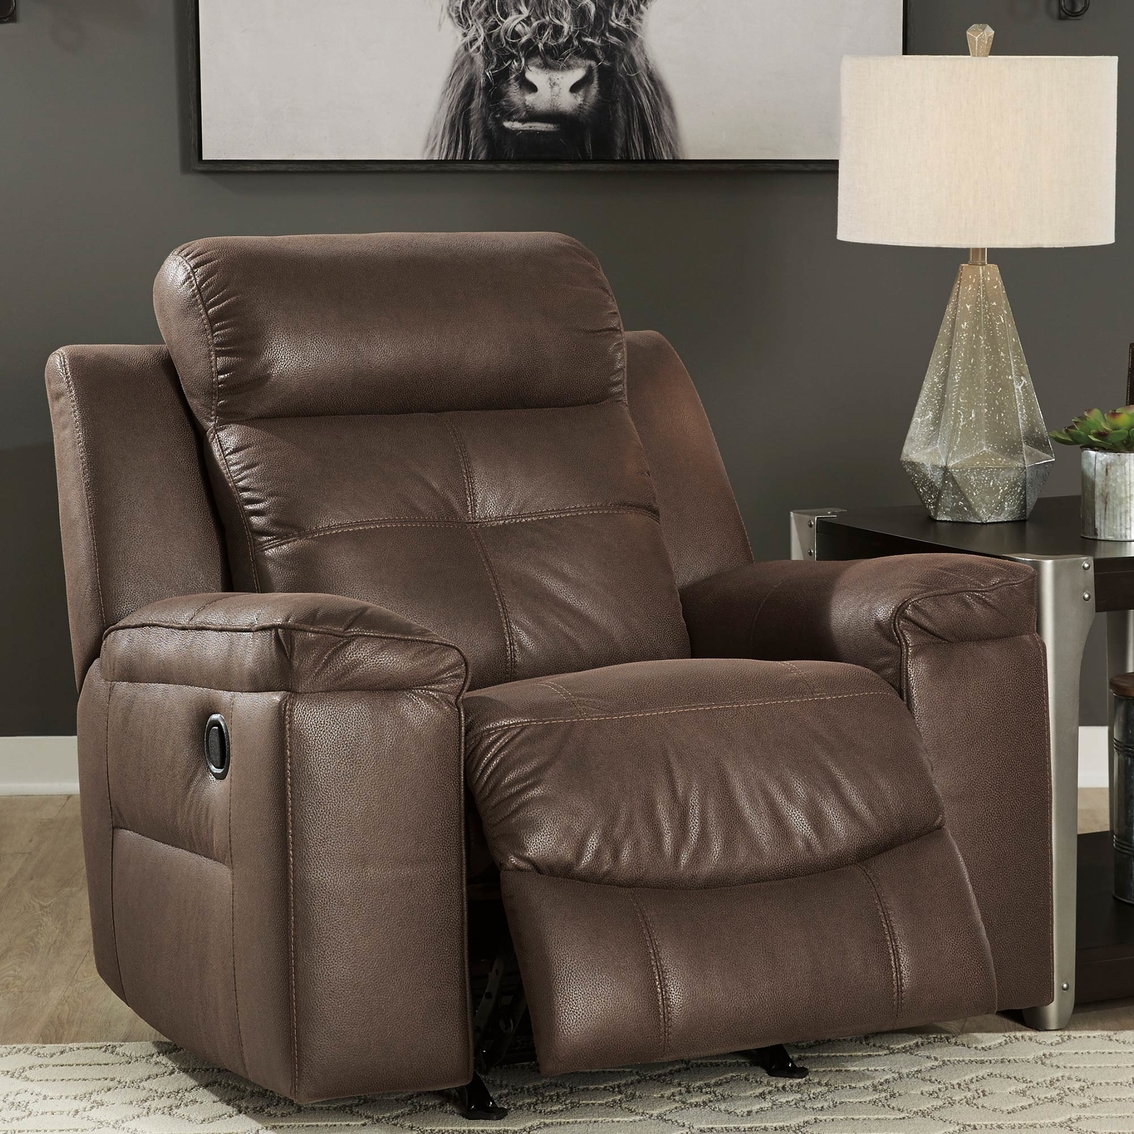 Signature Design by Ashley Jesolo Reclining Sofa, Loveseat and Recliner Set - Image 2 of 4